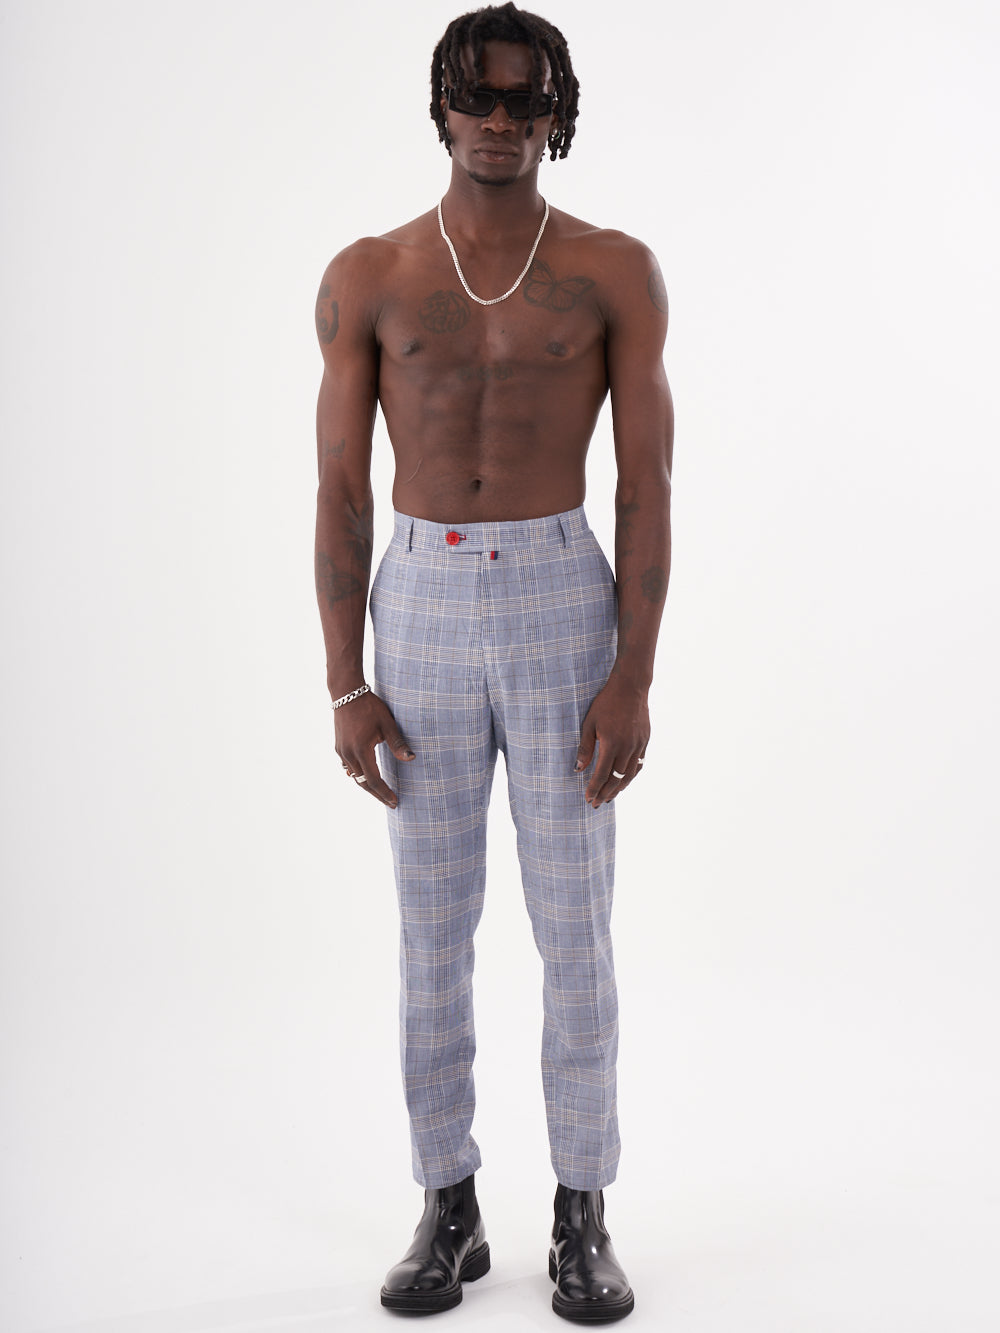 A man with no shirt and Moraine pants is standing in front of a white background.